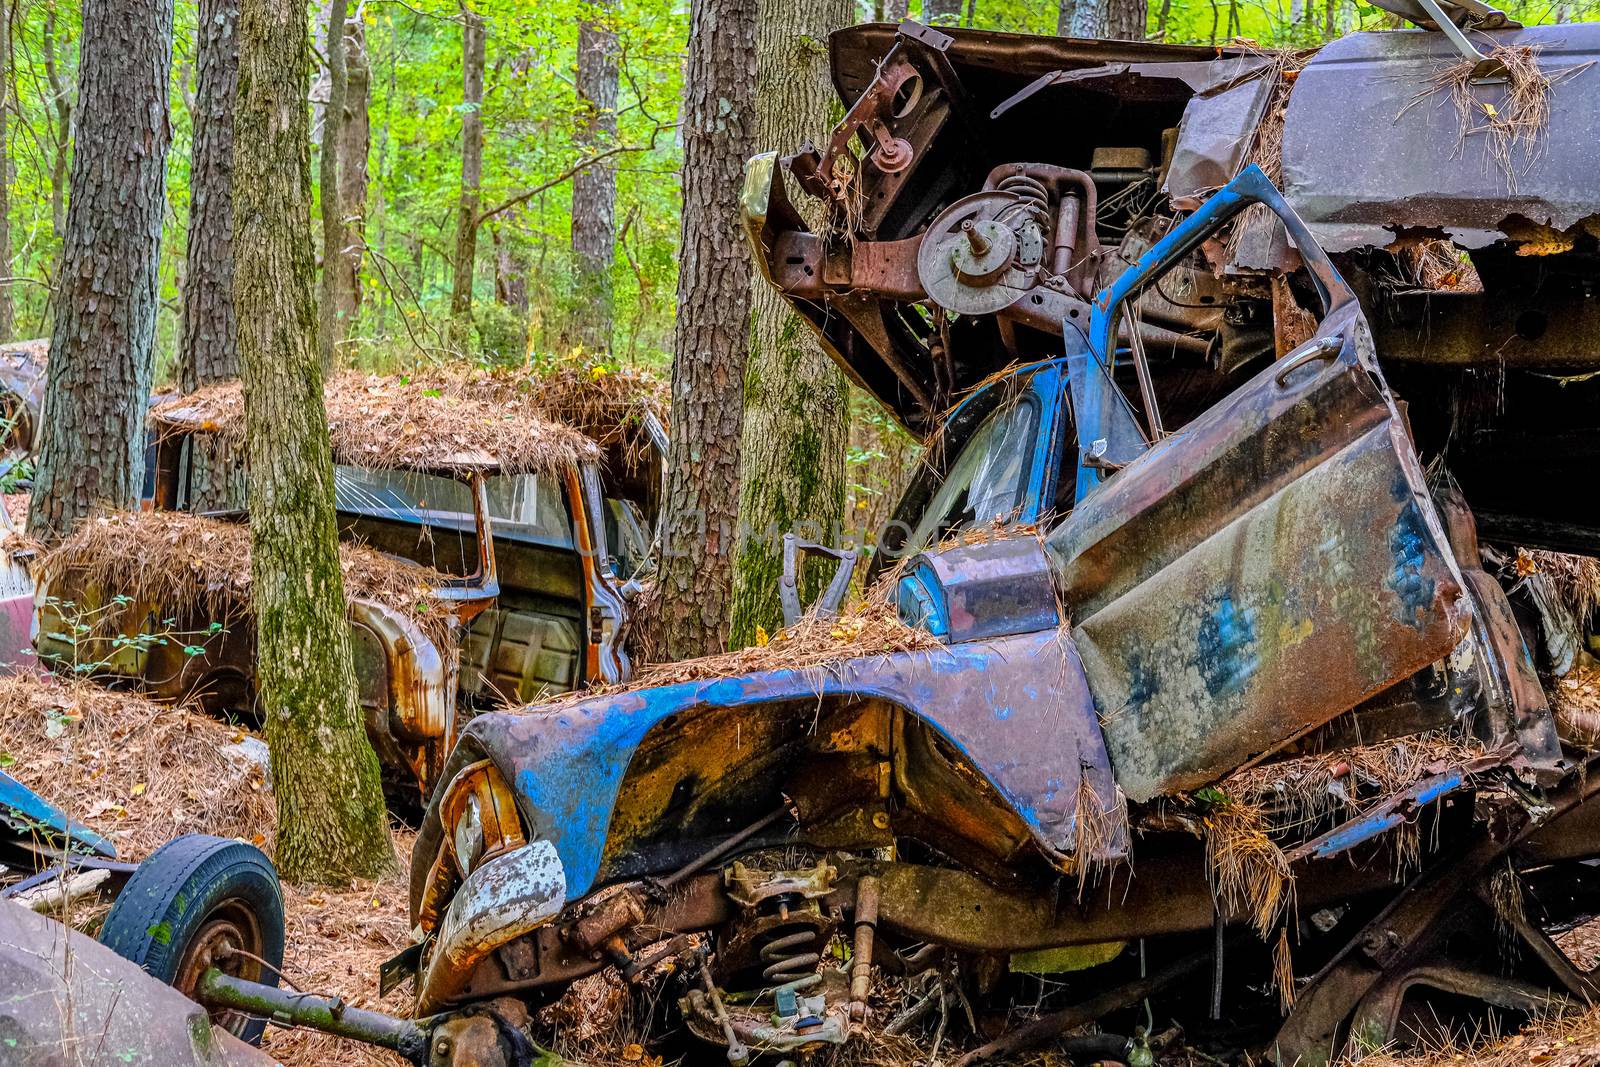 Piles of Wrecked Cars in a Woodland Junkyard